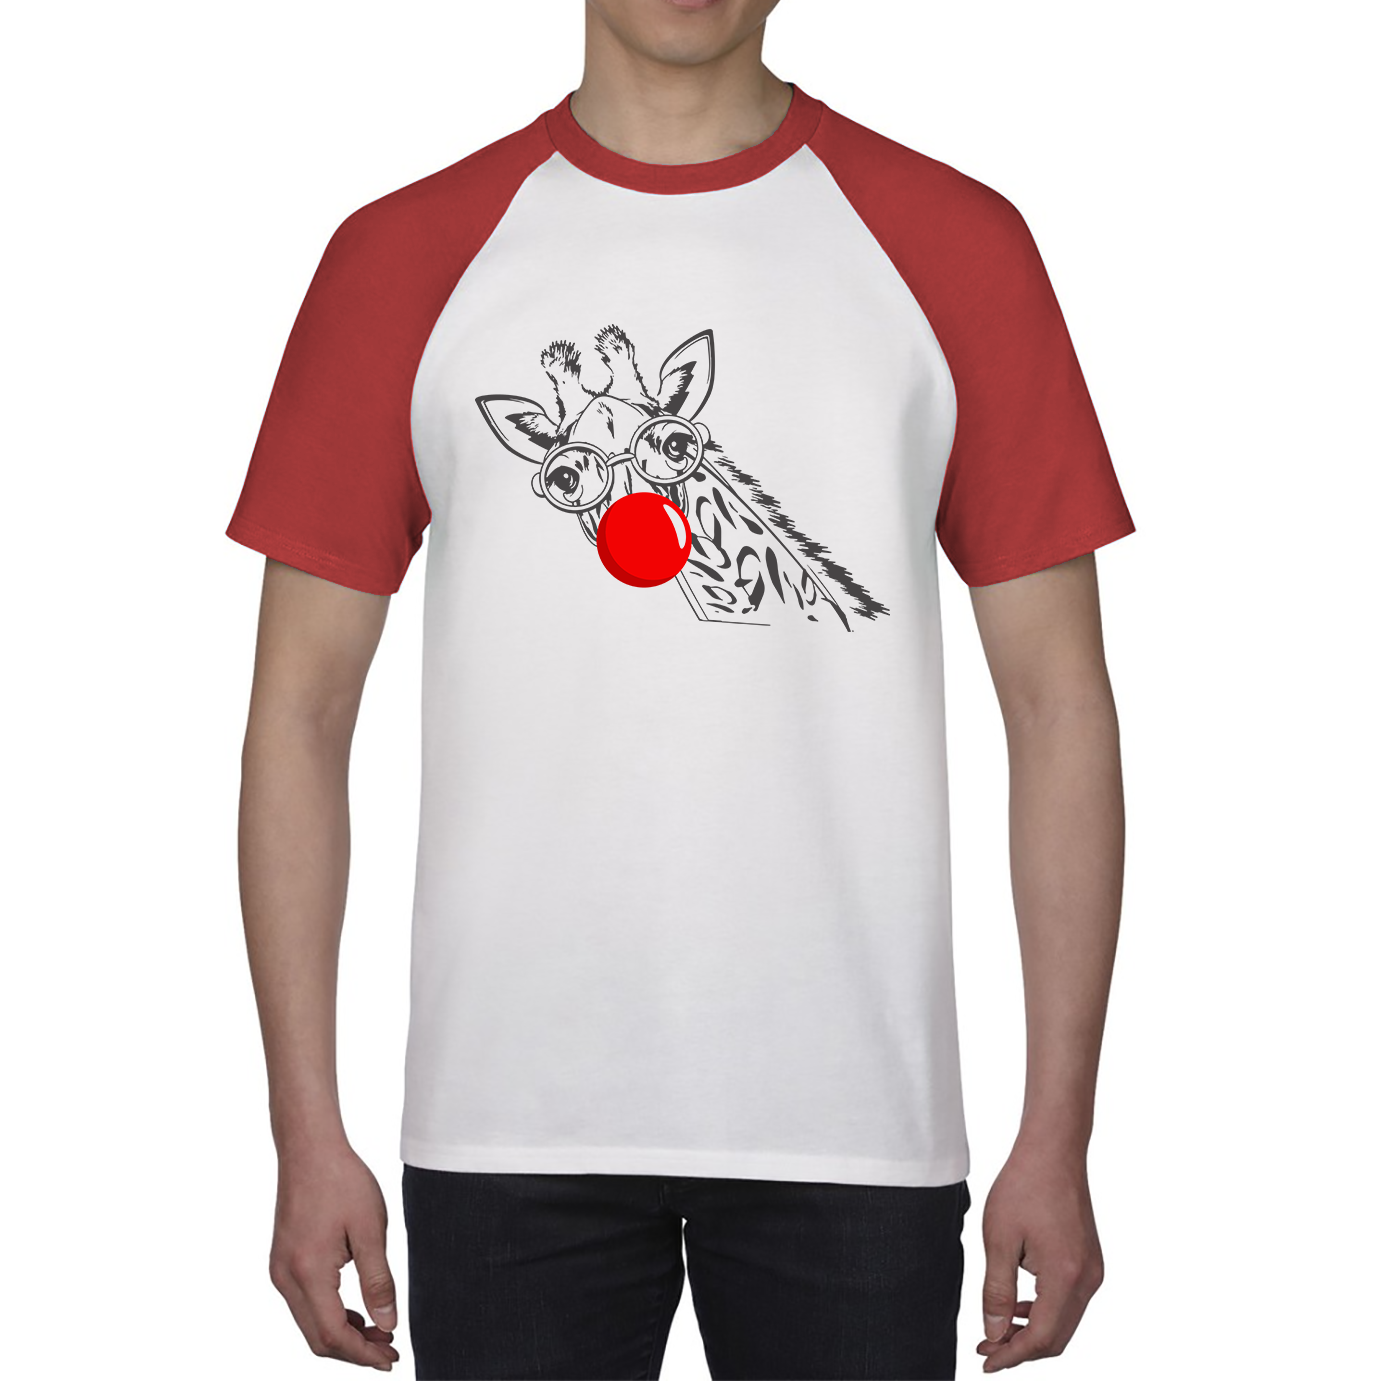 Giraffe Red Nose Day Baseball T Shirt. 50% Goes To Charity